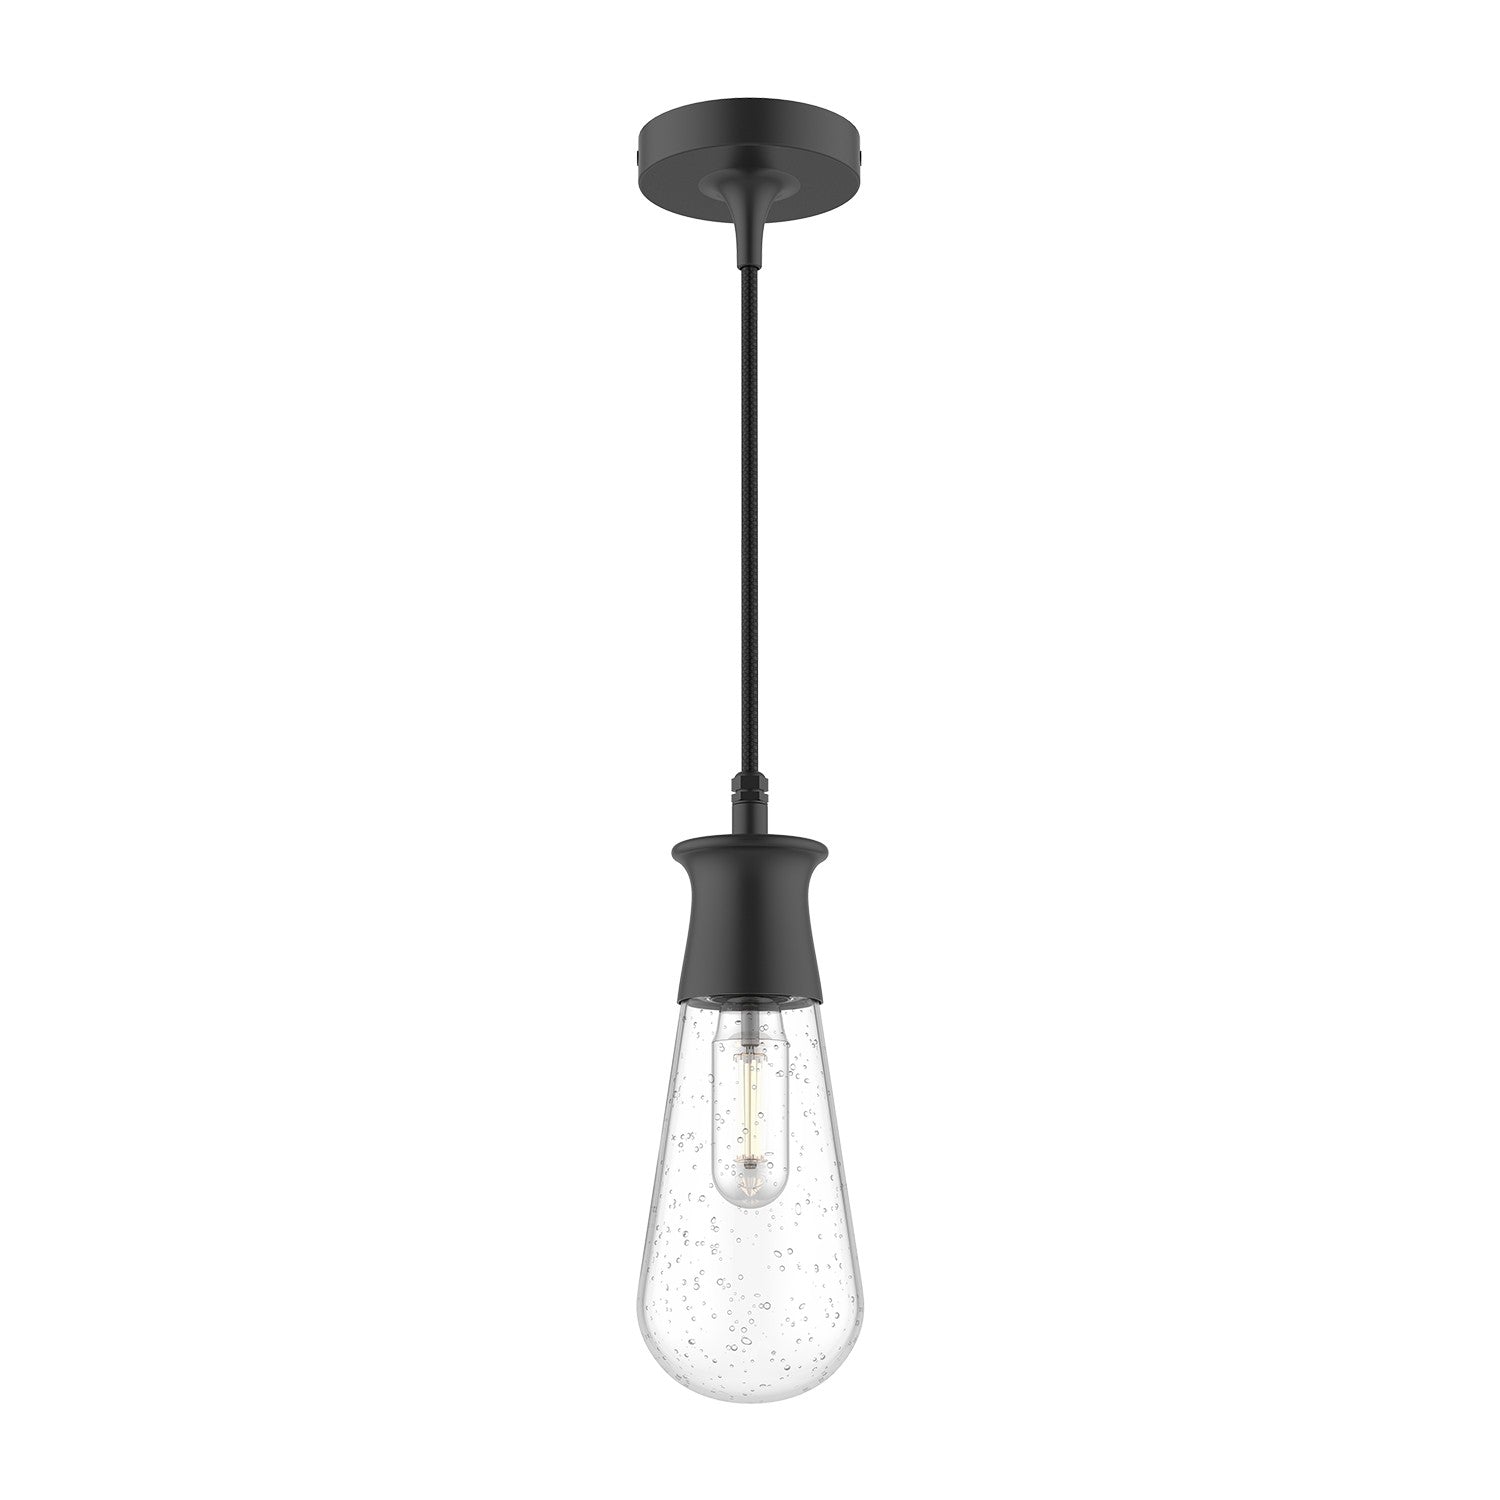 Alora - EP464001BKCB - One Light Outdoor Pendant - Marcel - Clear Bubble Glass/Textured Black